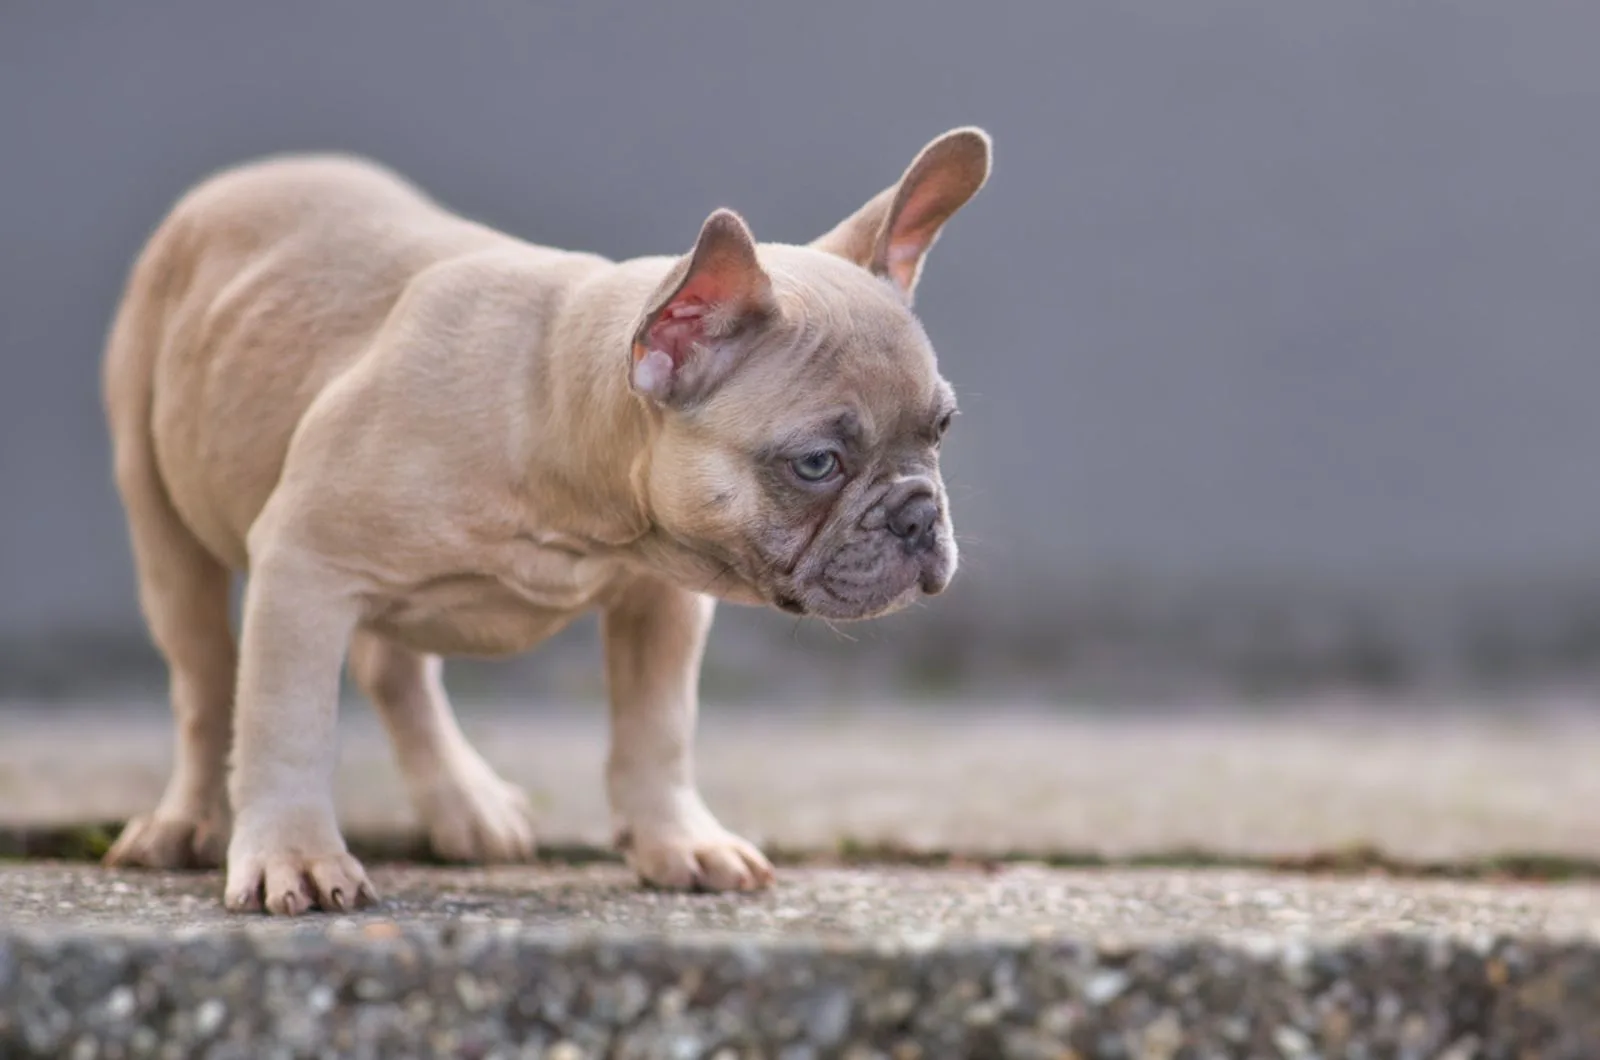 french bulldog with blue eyes standing on concrete and looking down